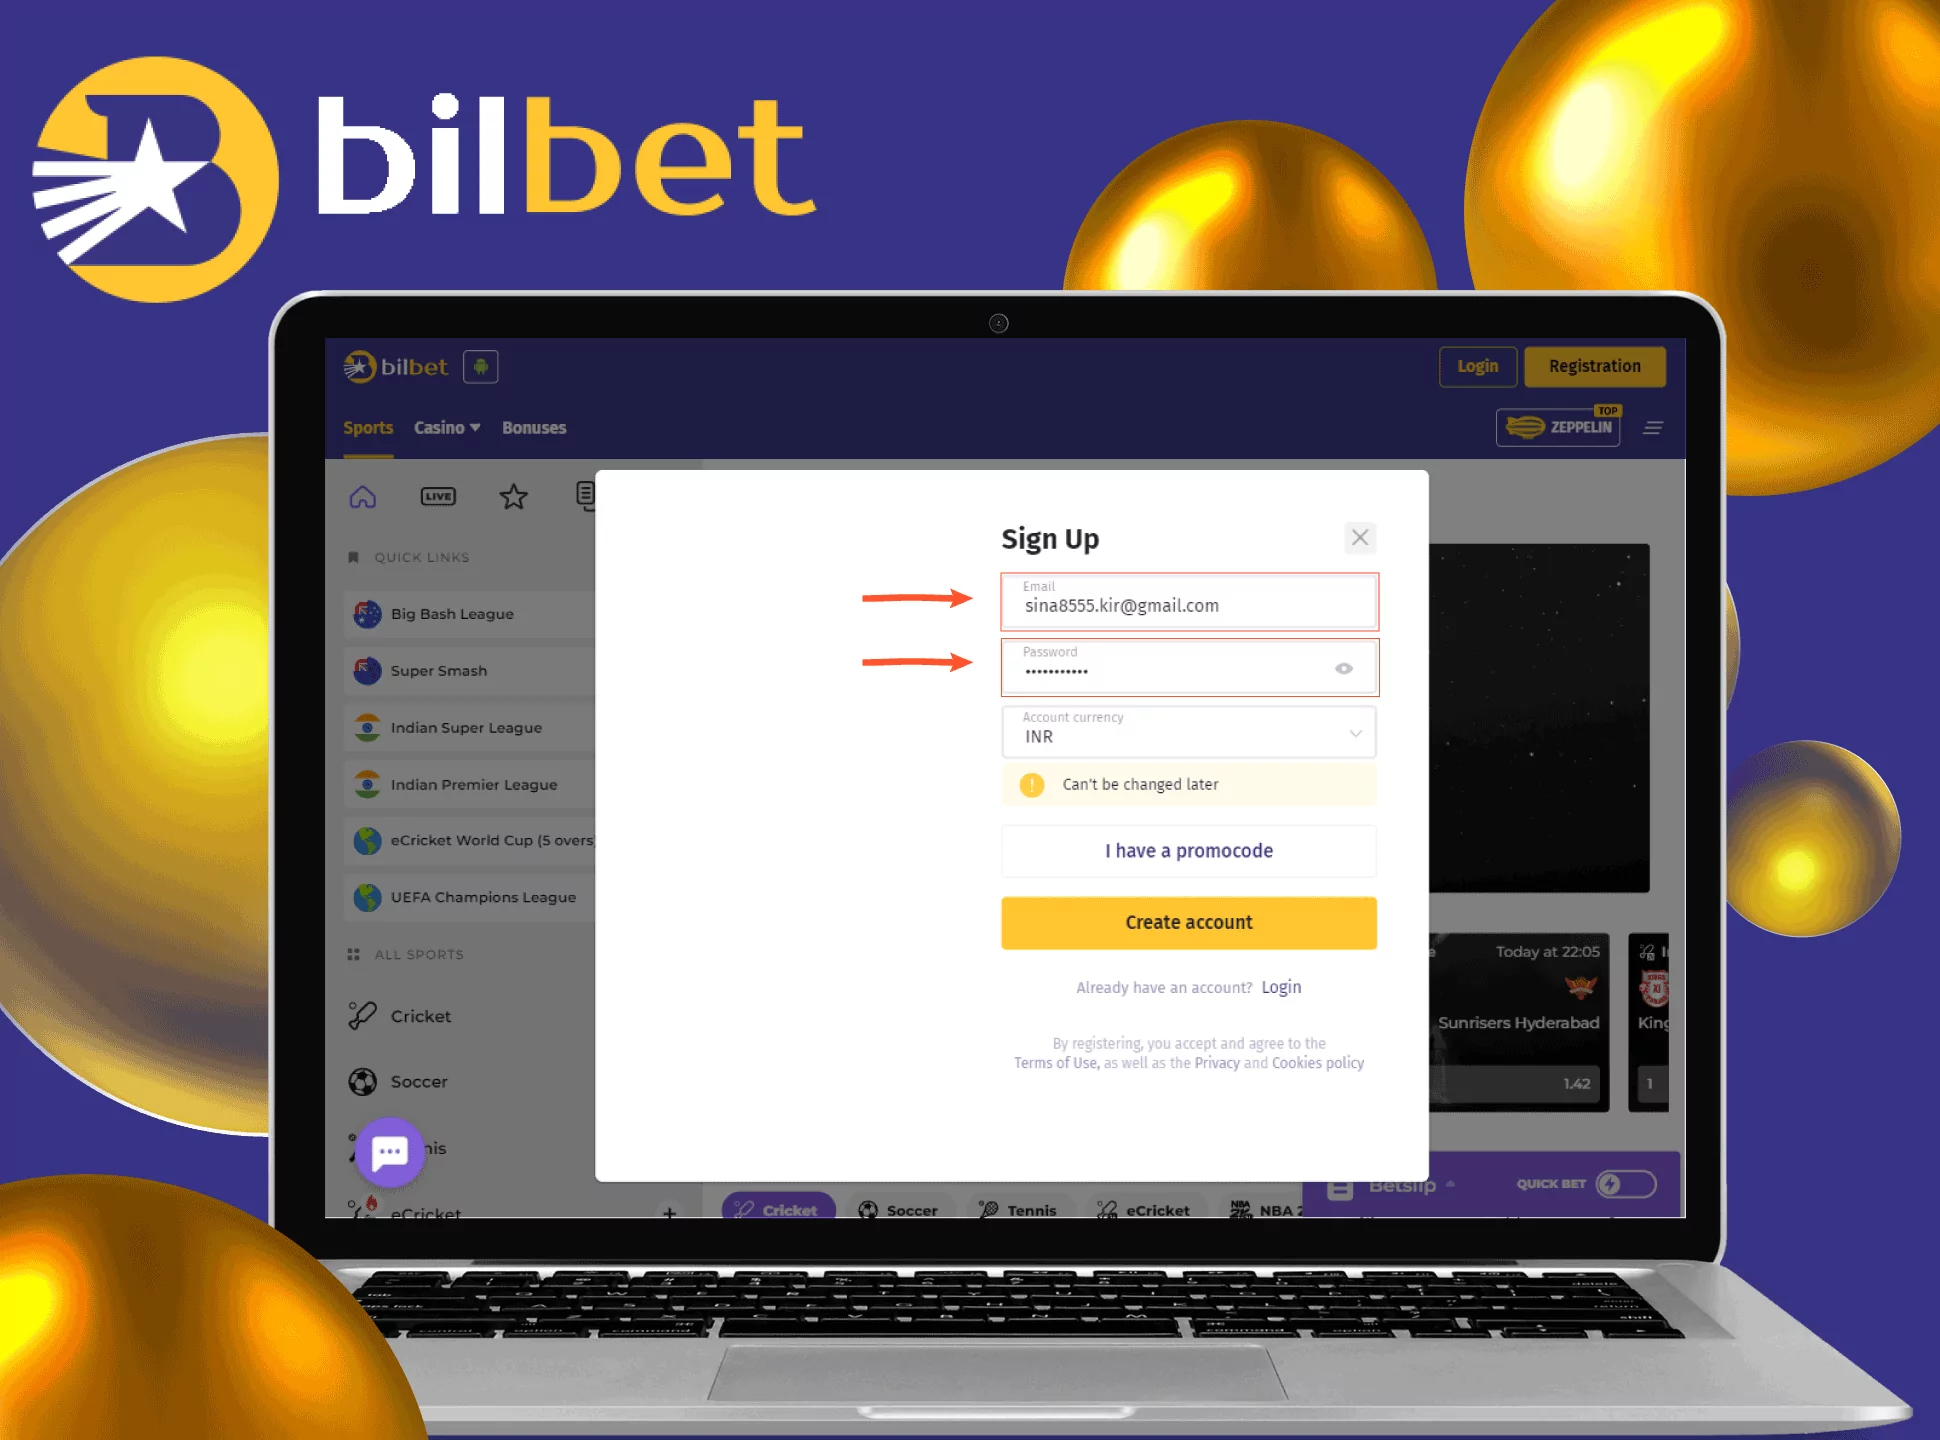 Provide Bilbet with personal information.